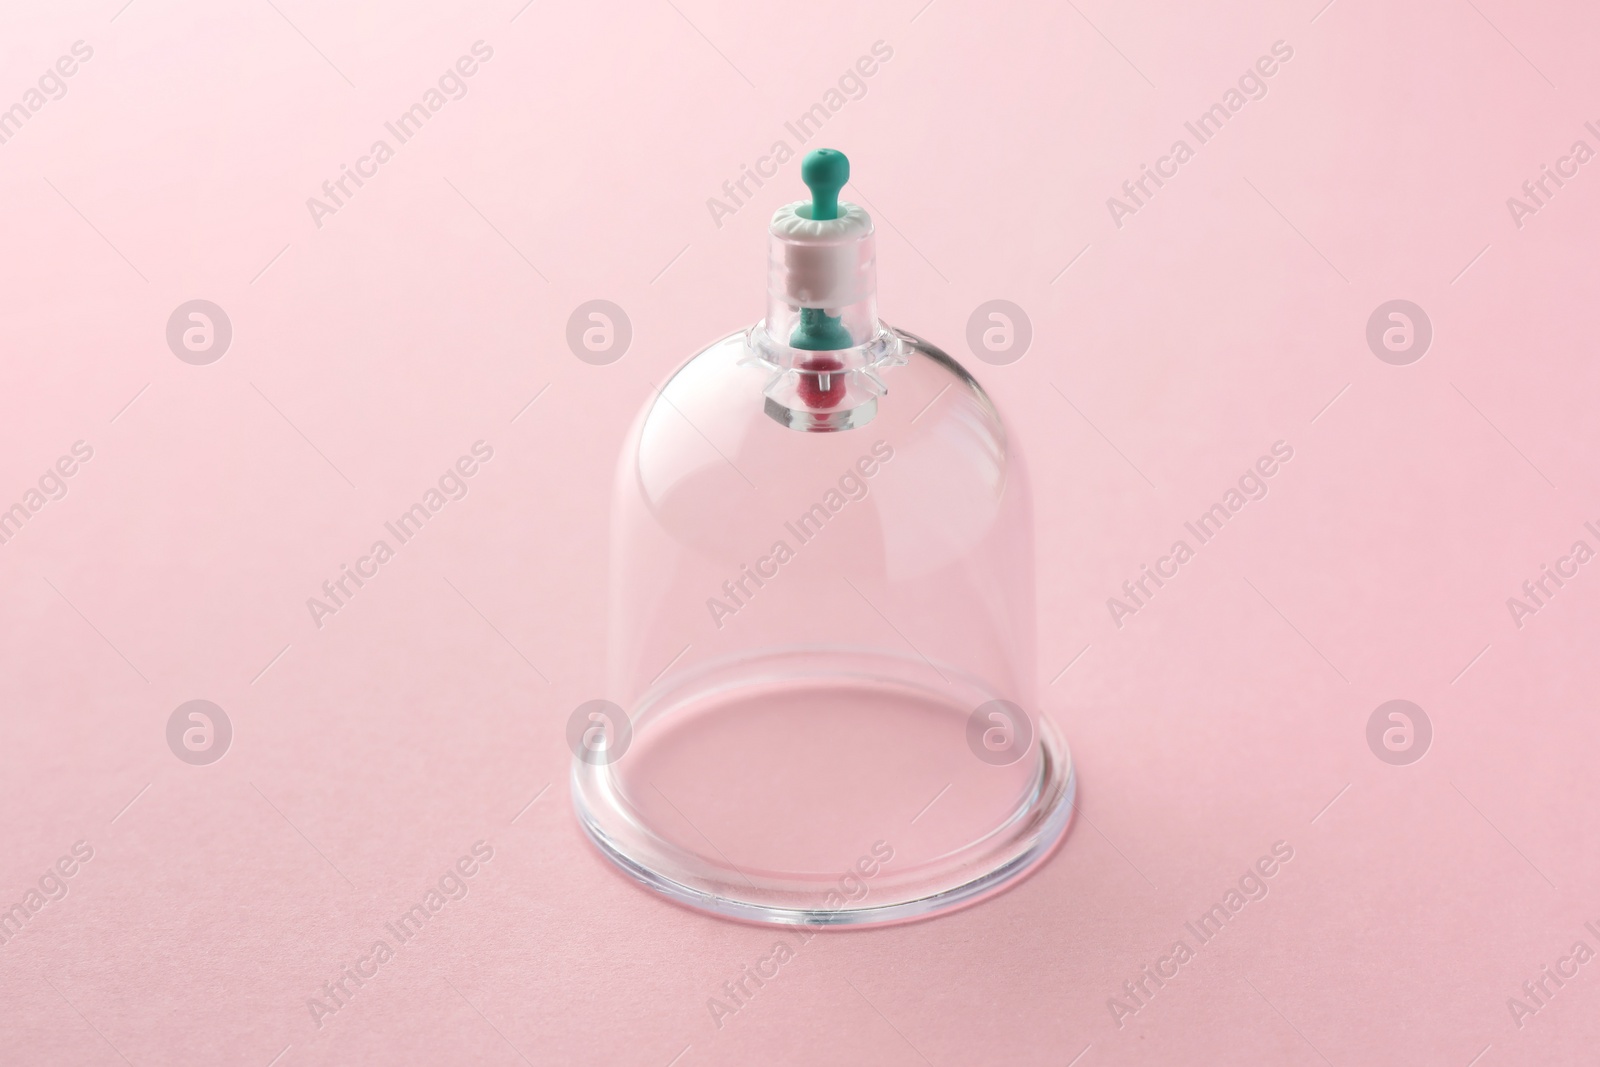 Photo of Plastic cup on pink background. Cupping therapy